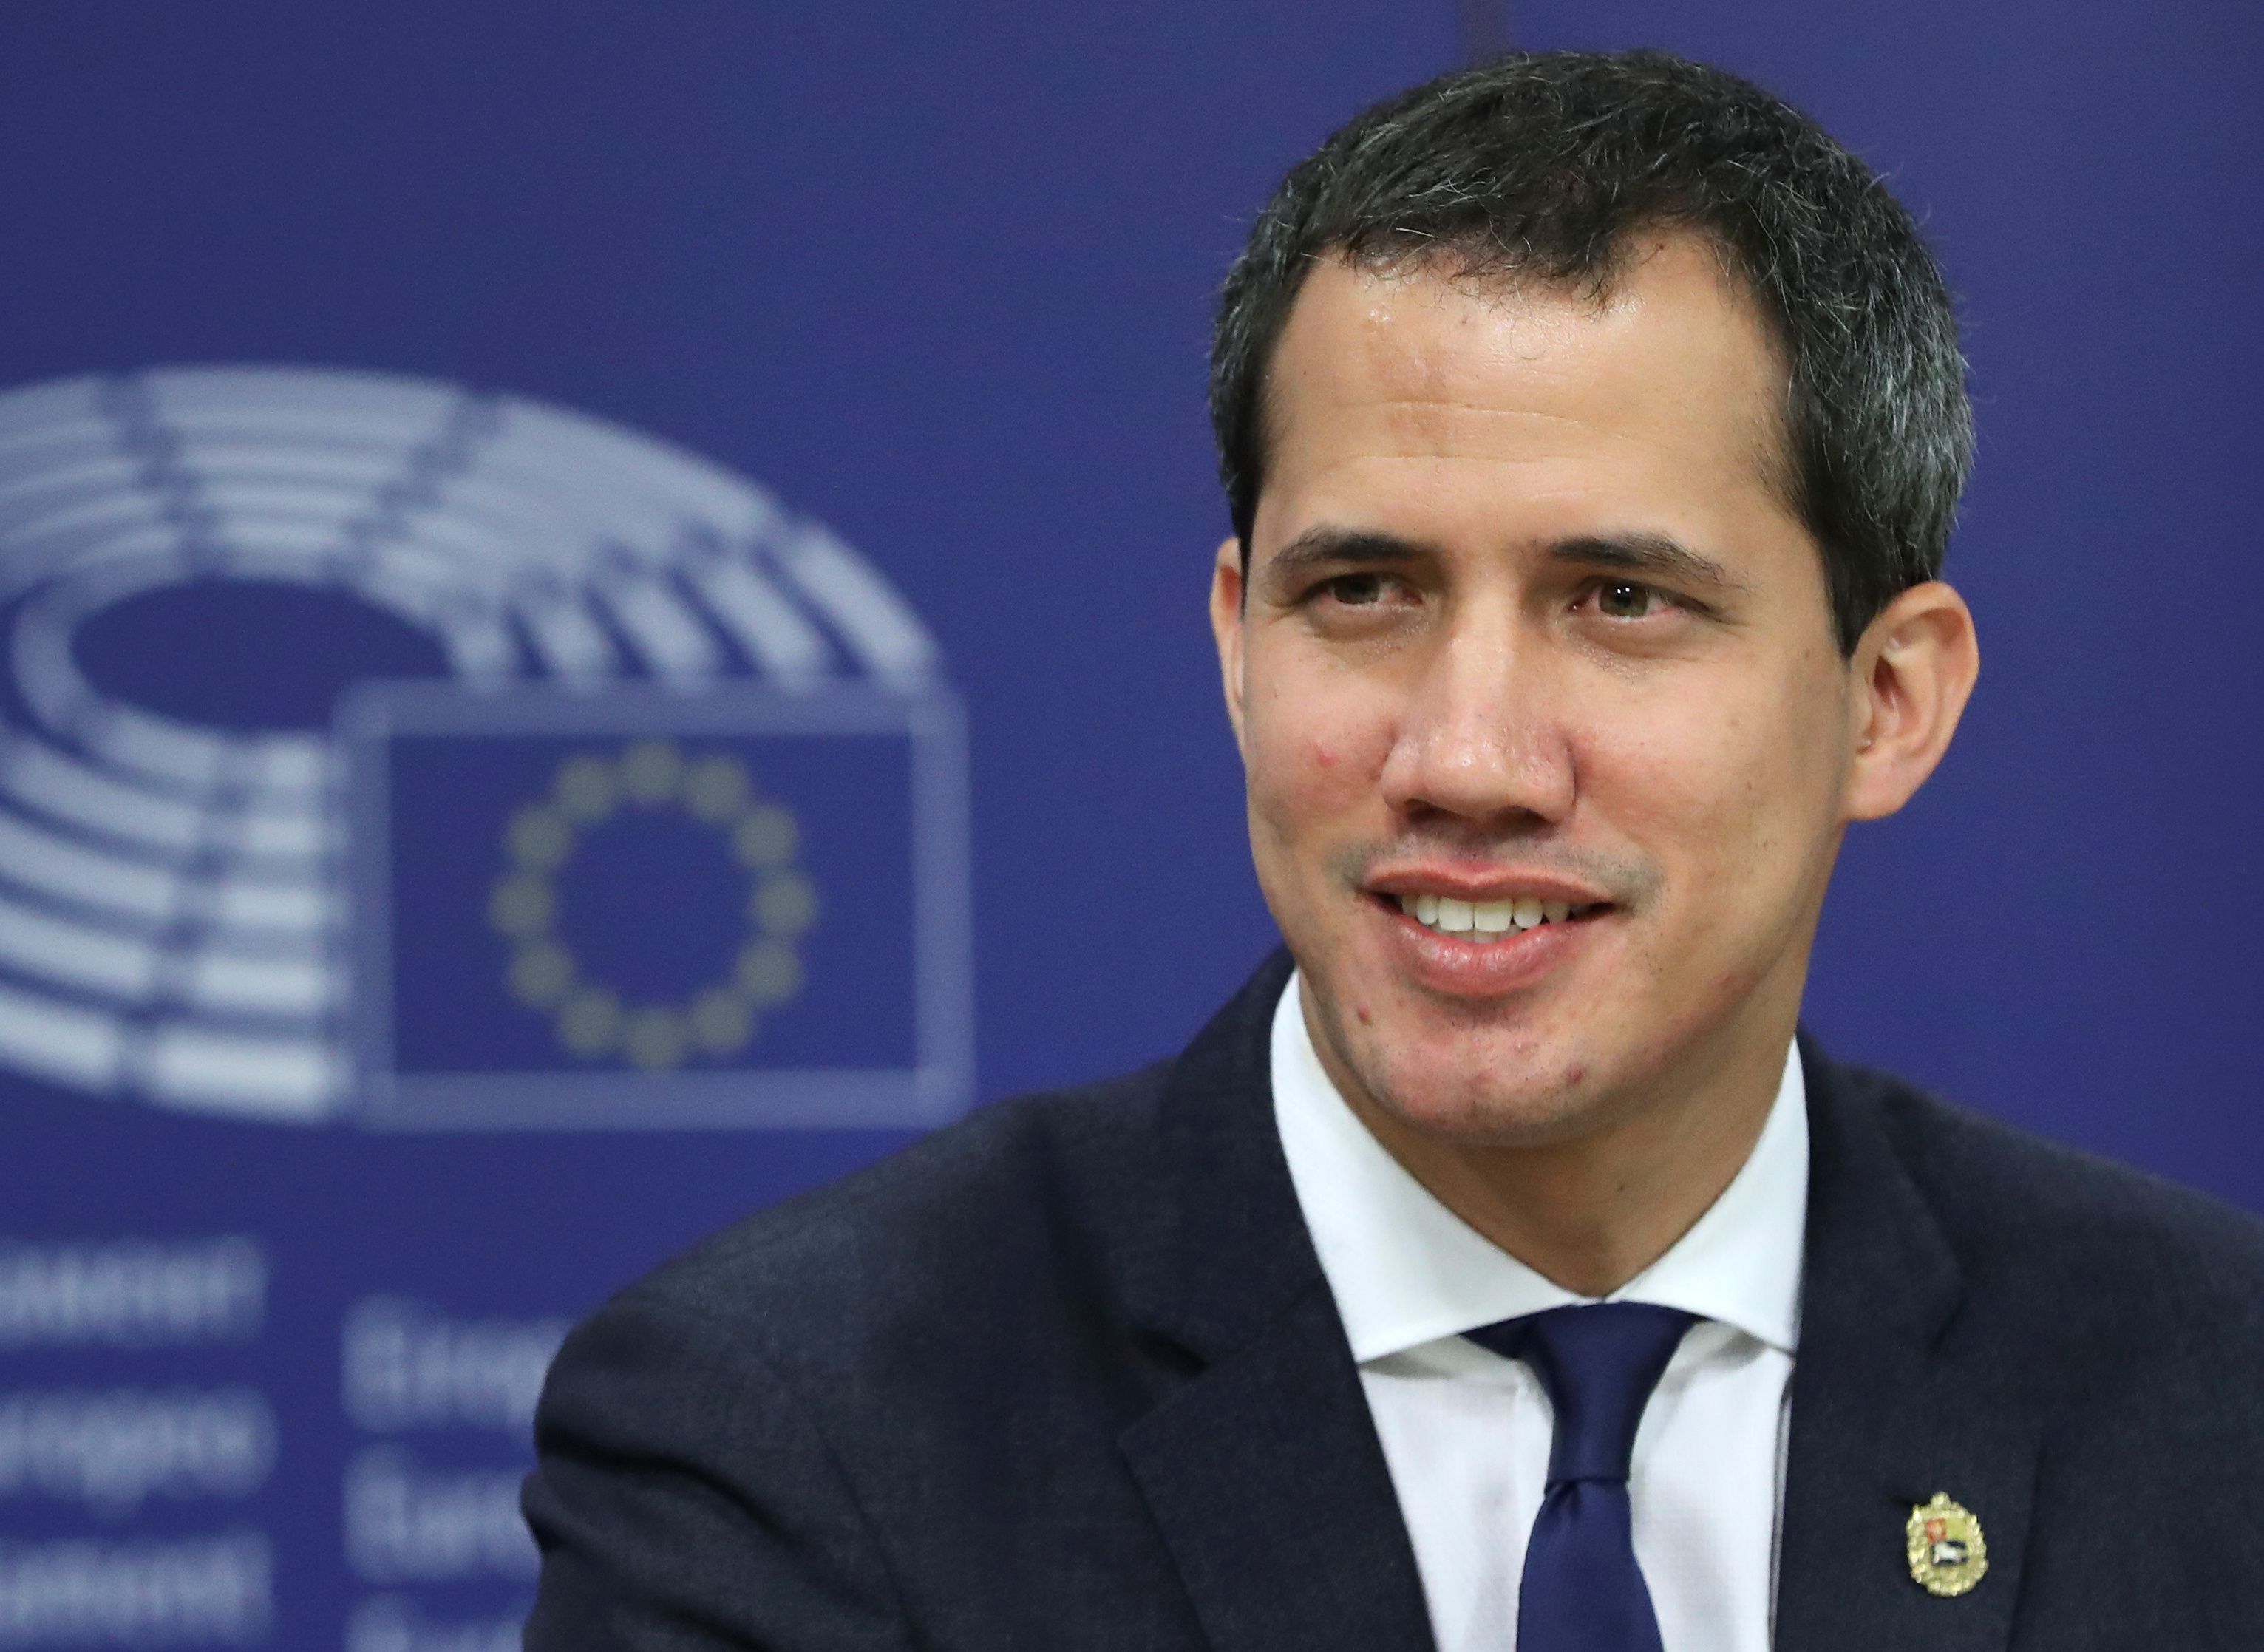 Venezuelan opposition leader Juan Guaido holds a news conference at the European Parliament in Brussels, Belgium January 22, 2020. REUTERS/Yves Herman